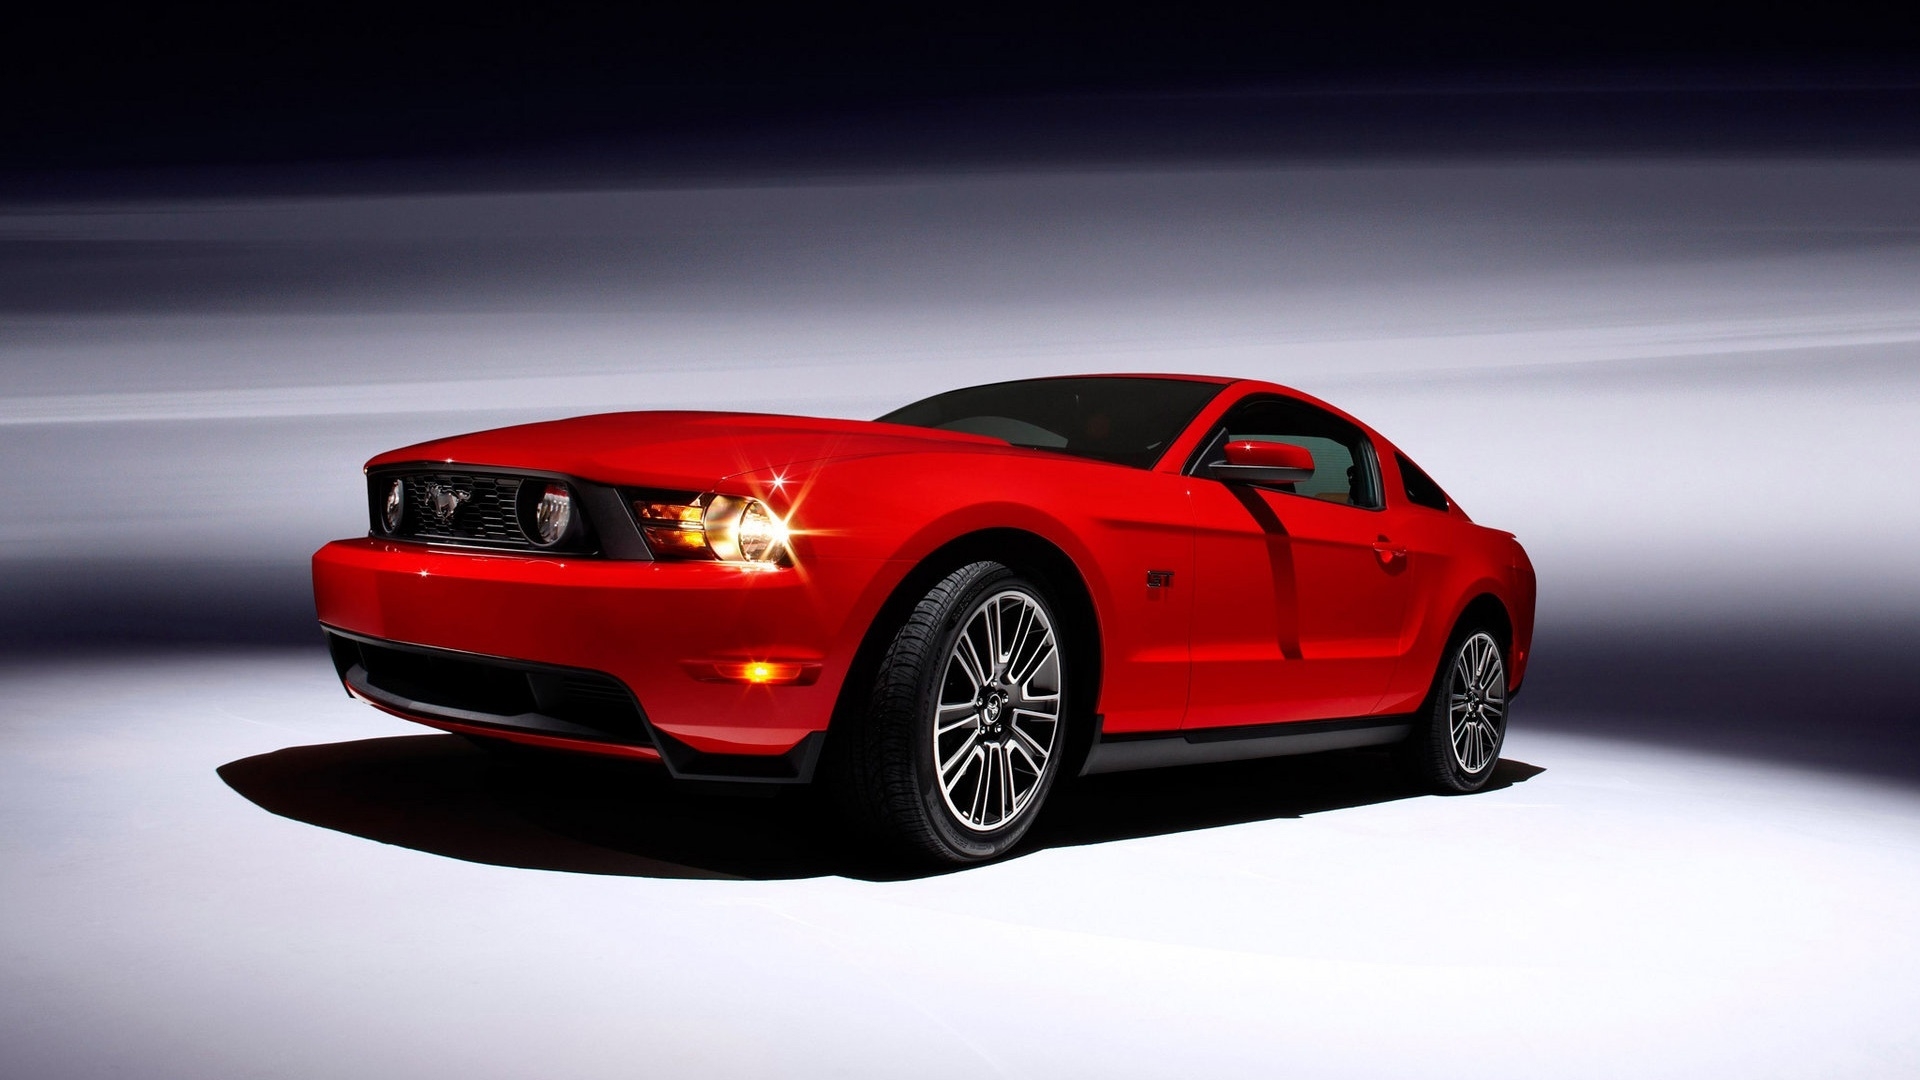 Ford Mustang Coupe 2010 for 1920 x 1080 HDTV 1080p resolution